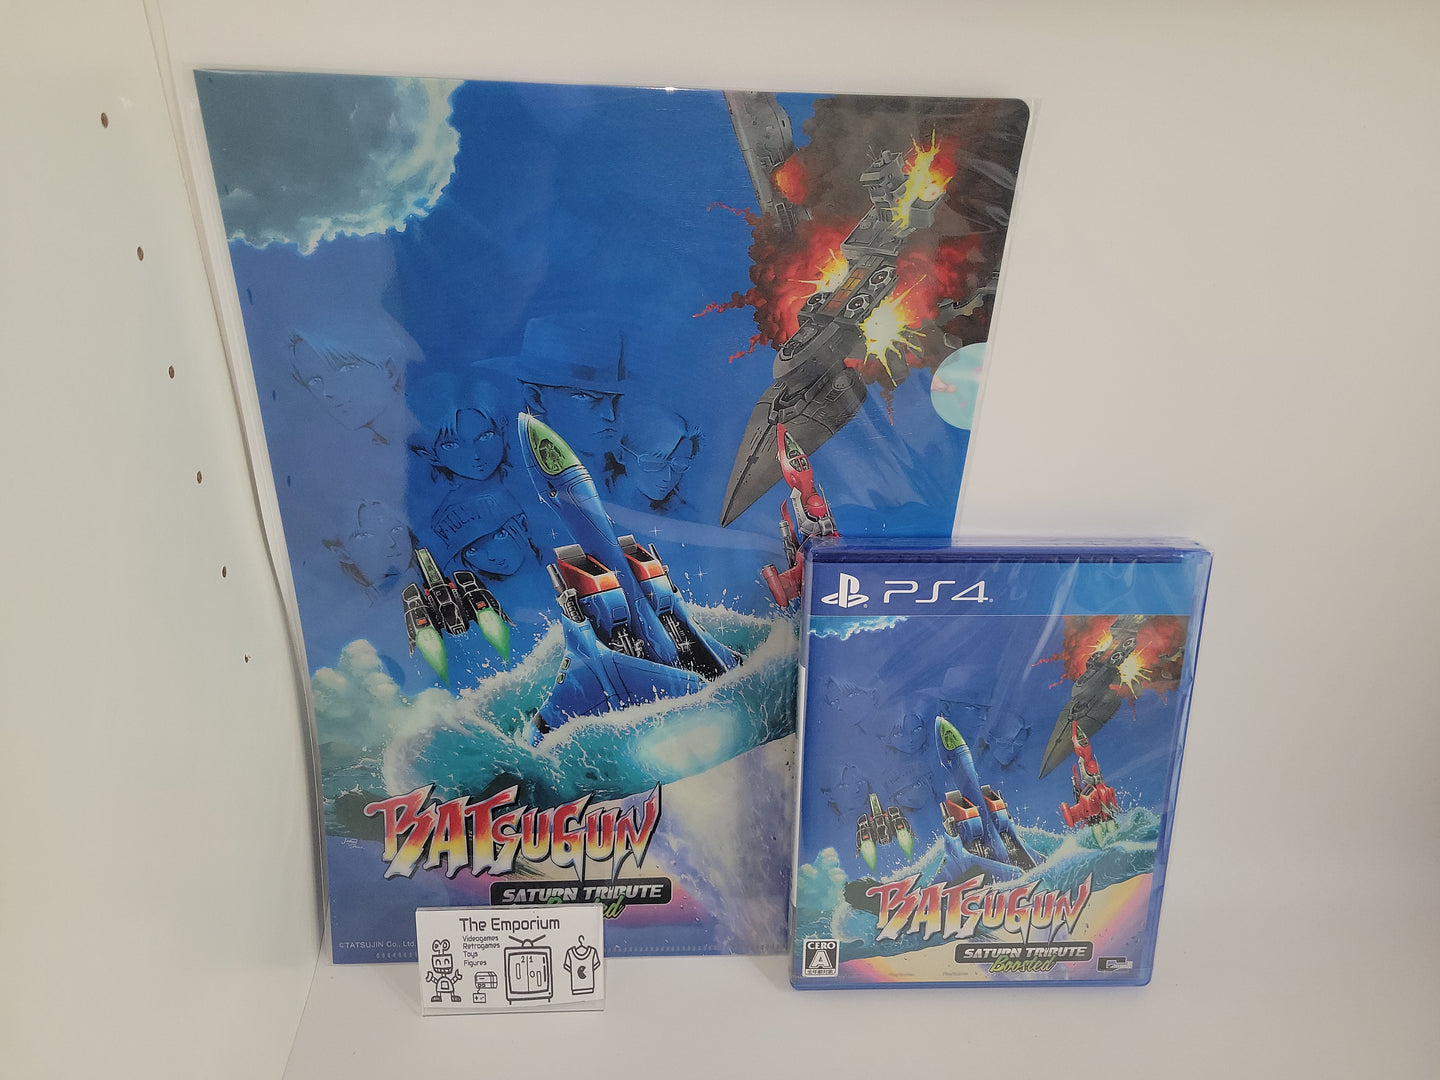 Batsugun Saturn Tribute Boosted normal edition - Sony PS4 Playstation 4